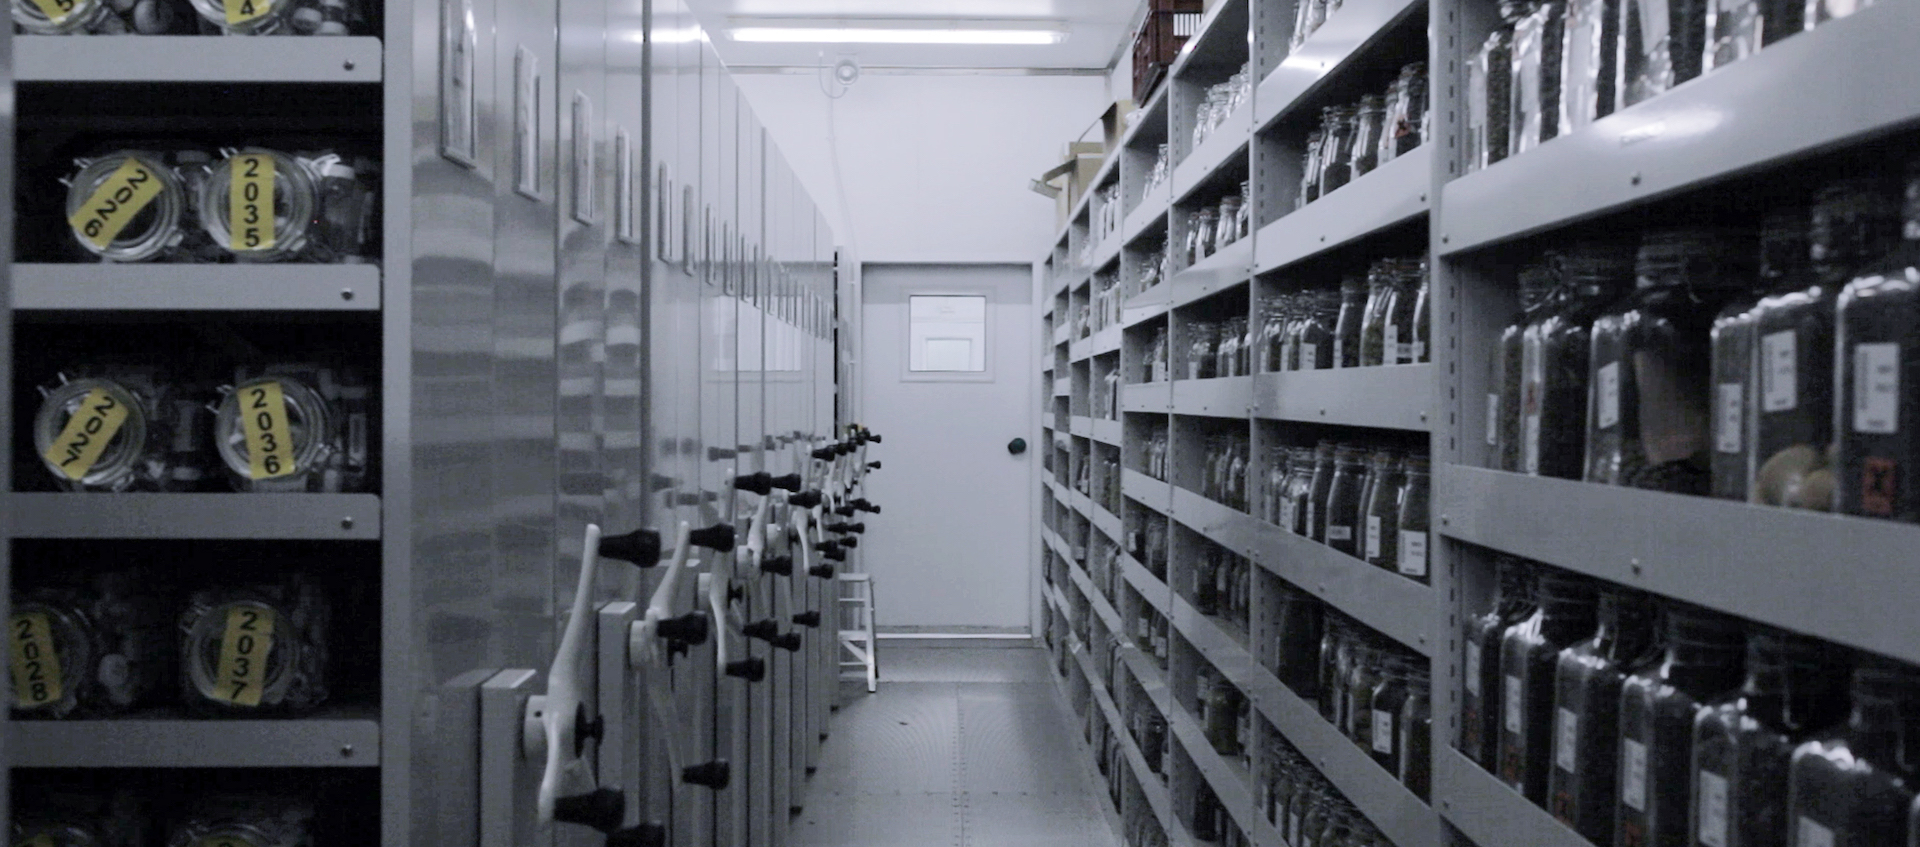 A shot from inside London's Millennium Seed Bank, in the 2018 video work The Ague by artist Pilar Mata Dupont